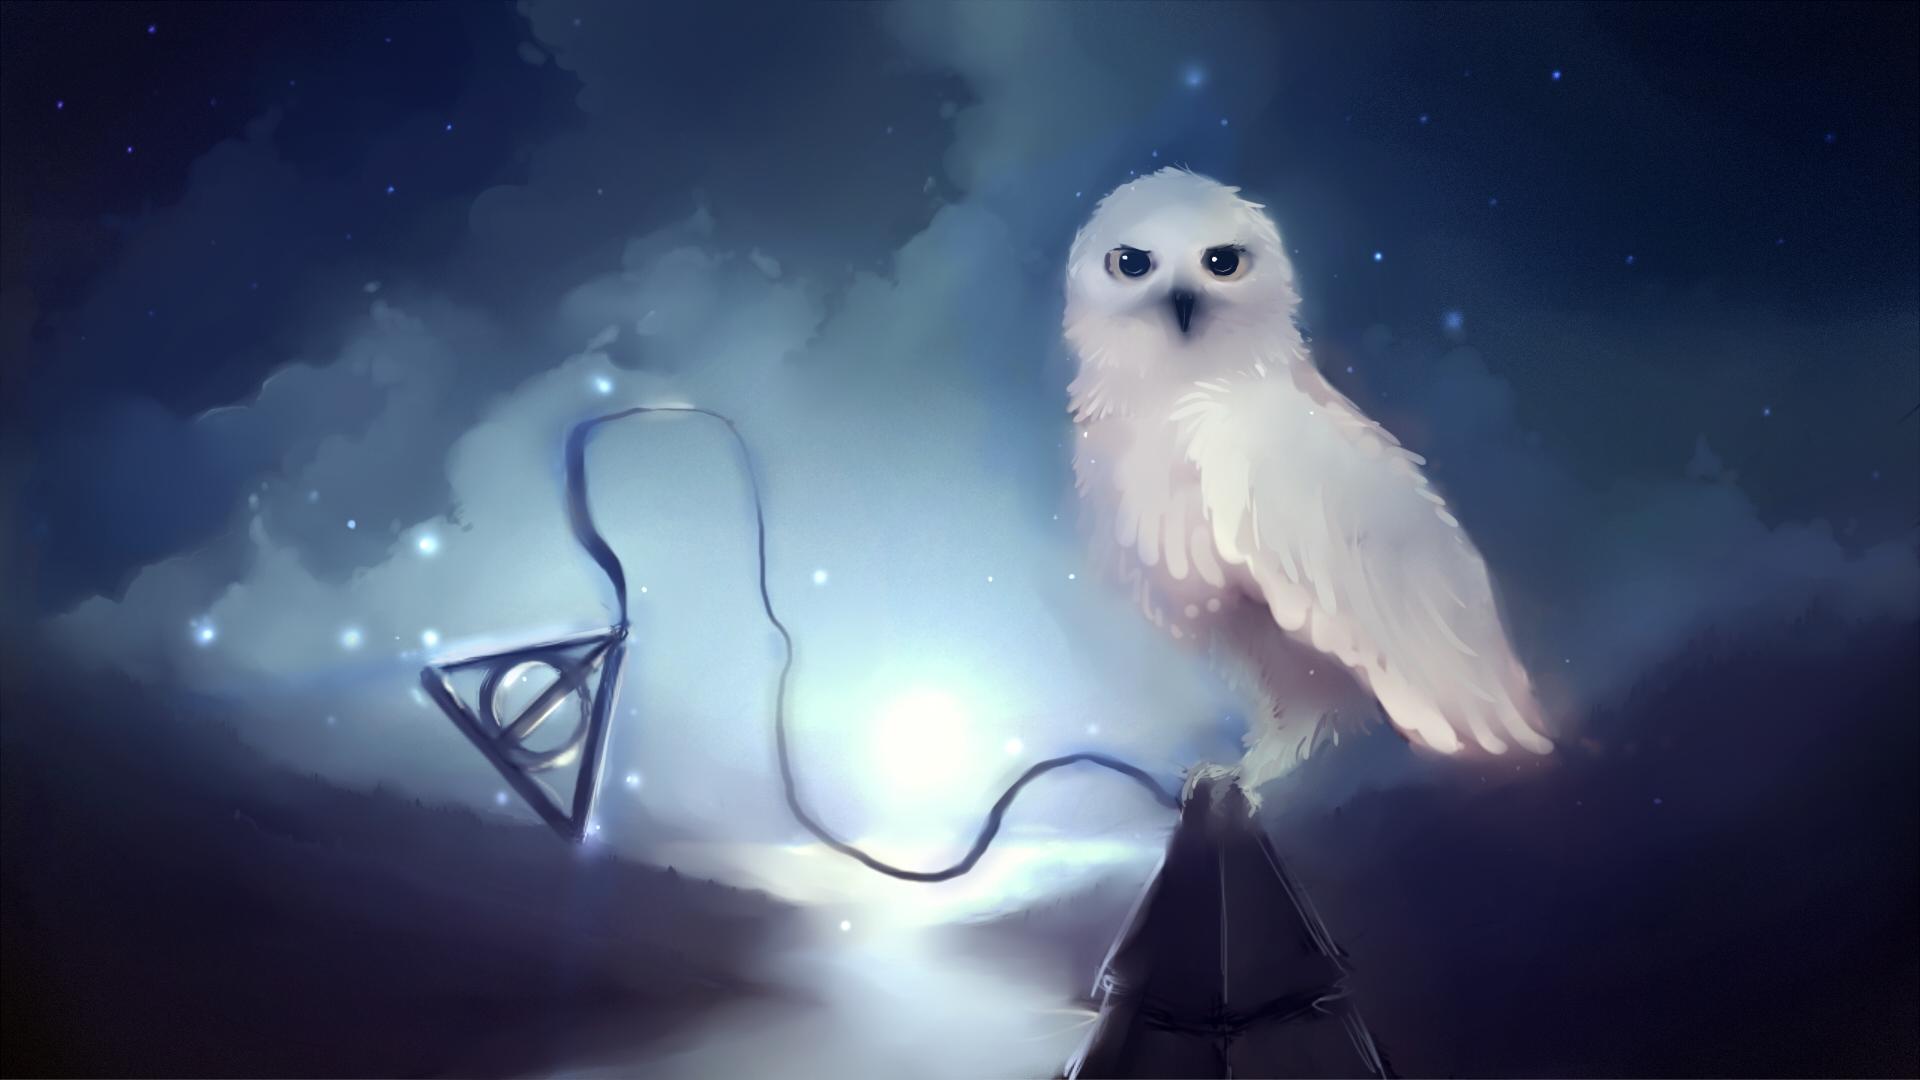 HEDWIG AND THE DEATHLY HALLOWS NECKLACE WALLPAPER - (#48498) - HD ...